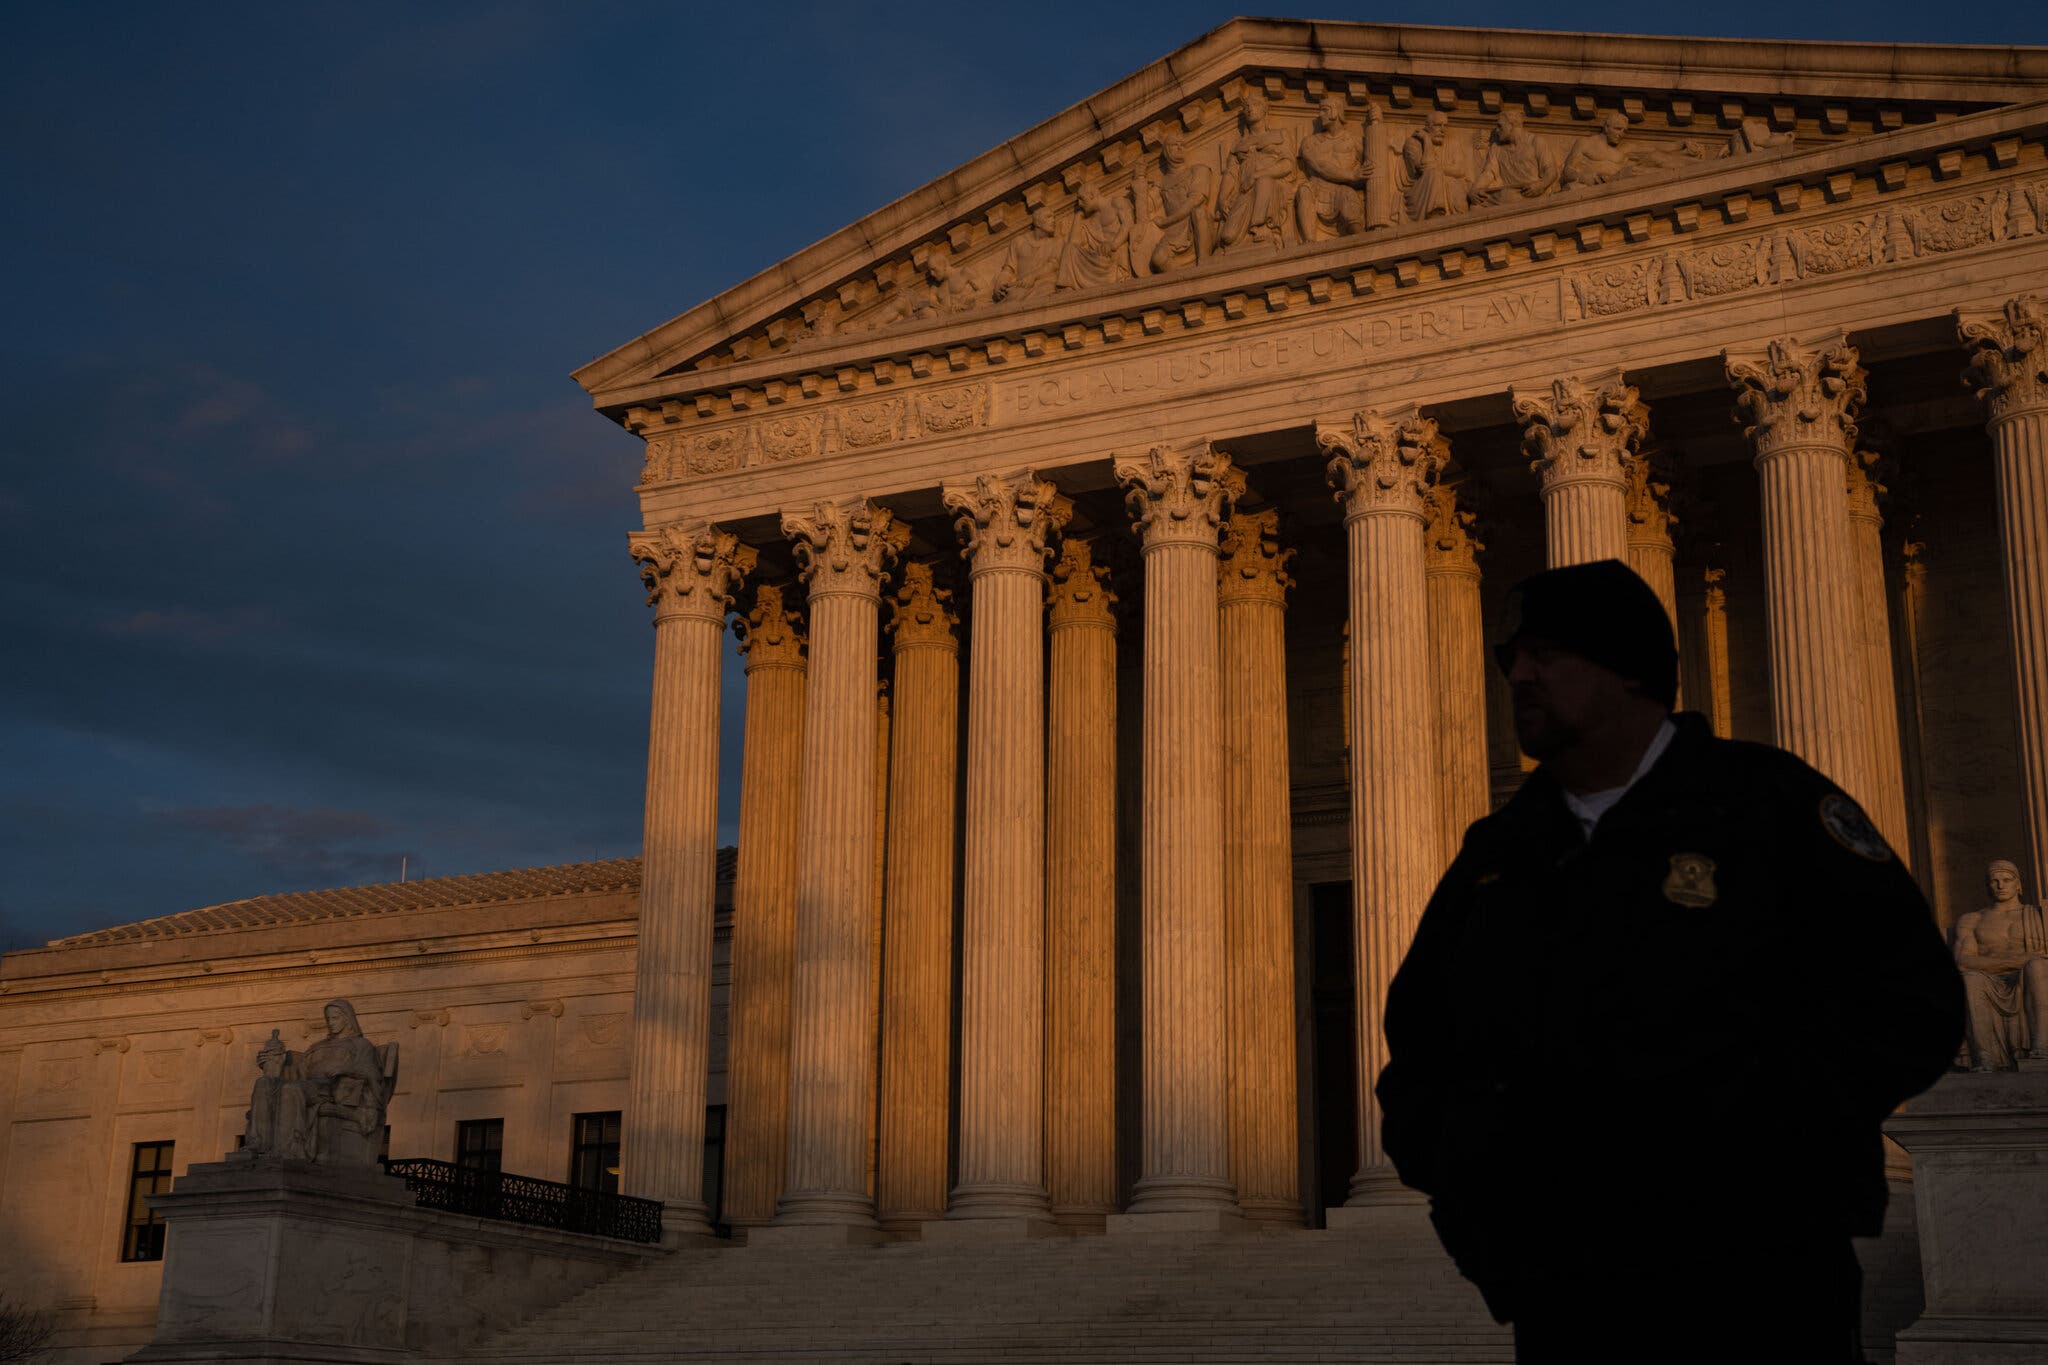 One study found that the Supreme Court led since 2005 by Chief Justice John G. Roberts Jr. has been “uniquely willing to check executive authority Haiyun Jiang:The New York Times